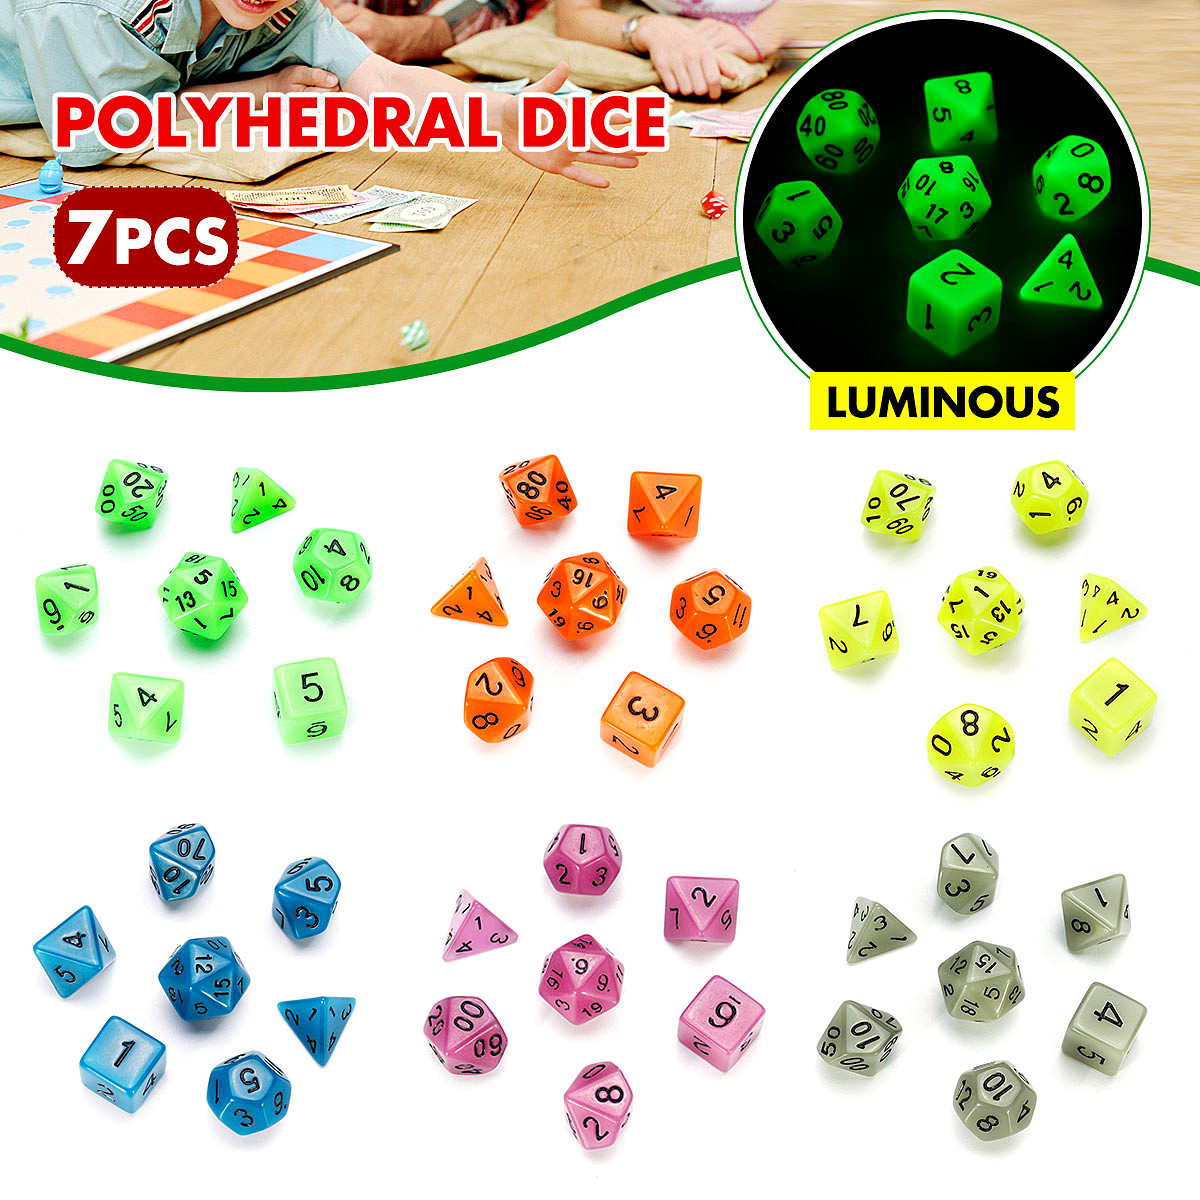 7-Pcs-Luminous-Polyhedral-Dices-Multi-sided-Dice-Set-Polyhedral-Dices-With-Dice-Cup-RPG-Gadget-1422236-2